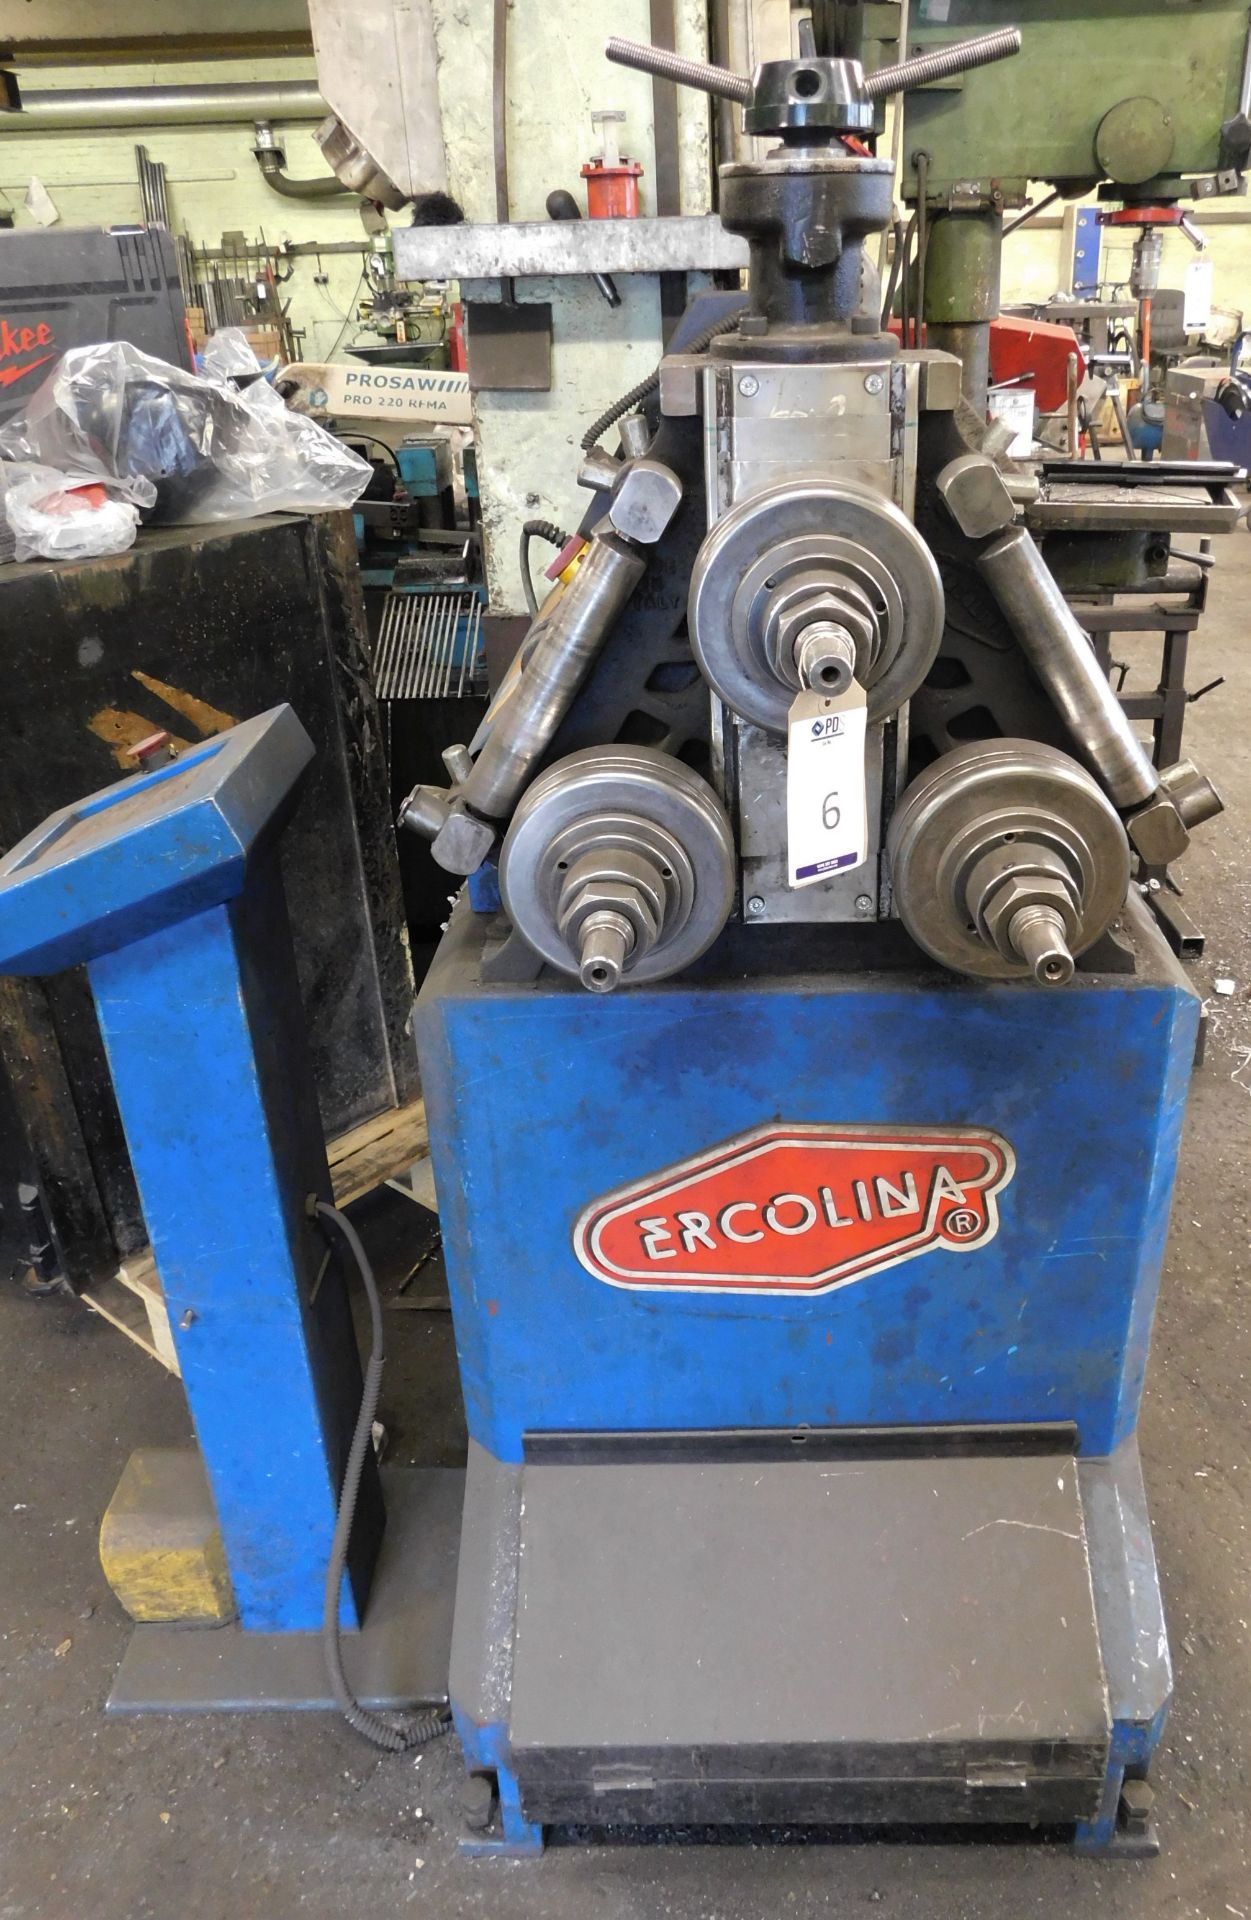 Ercolina CE40 MR3 Bender Serial Number 2040234 with Foot Pedal Controls (Location: Tottenham. Please